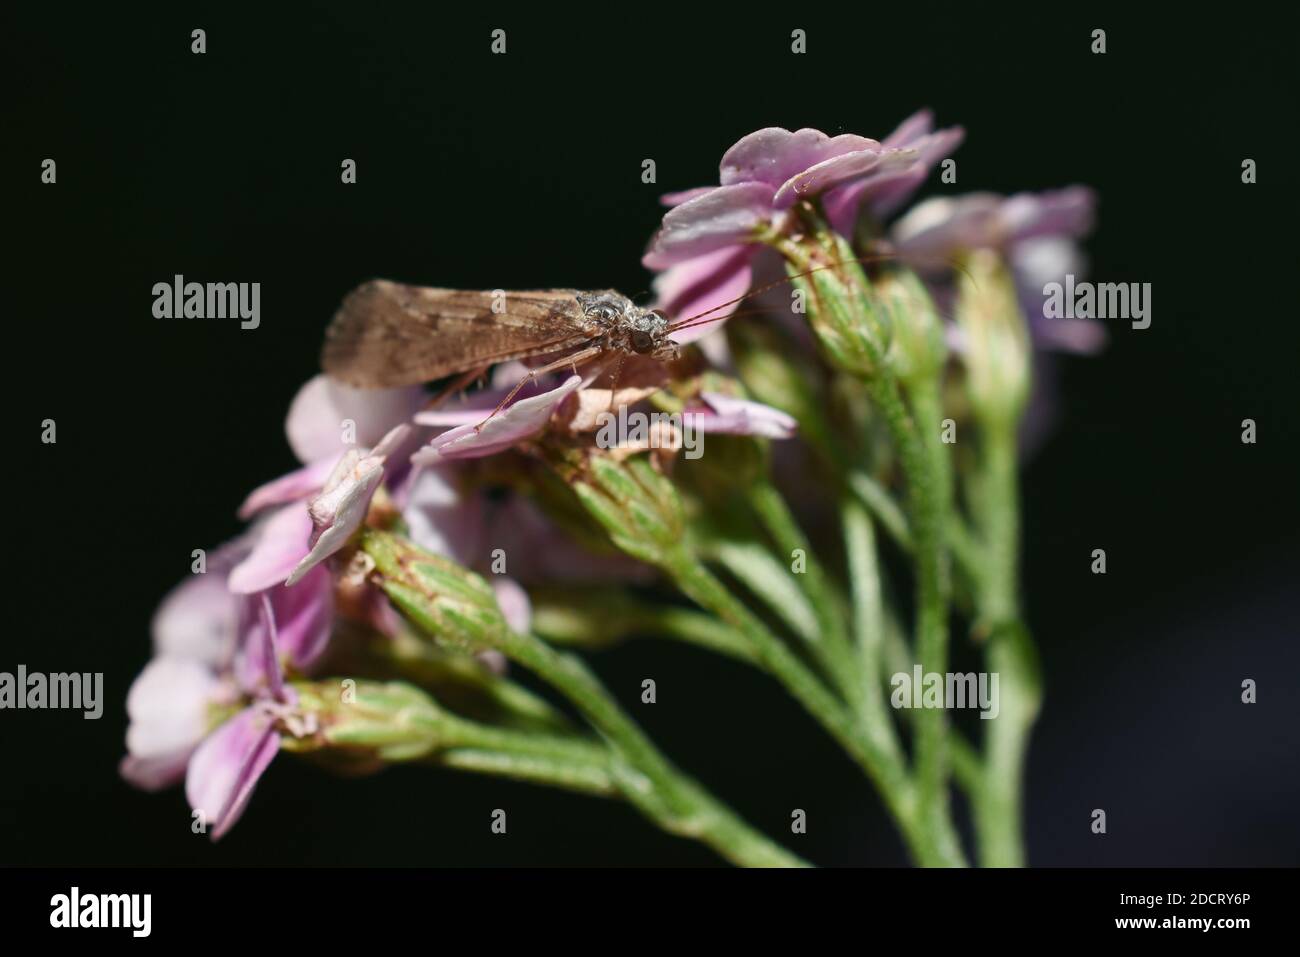 Caddisfly on pink flower on a black background Stock Photo